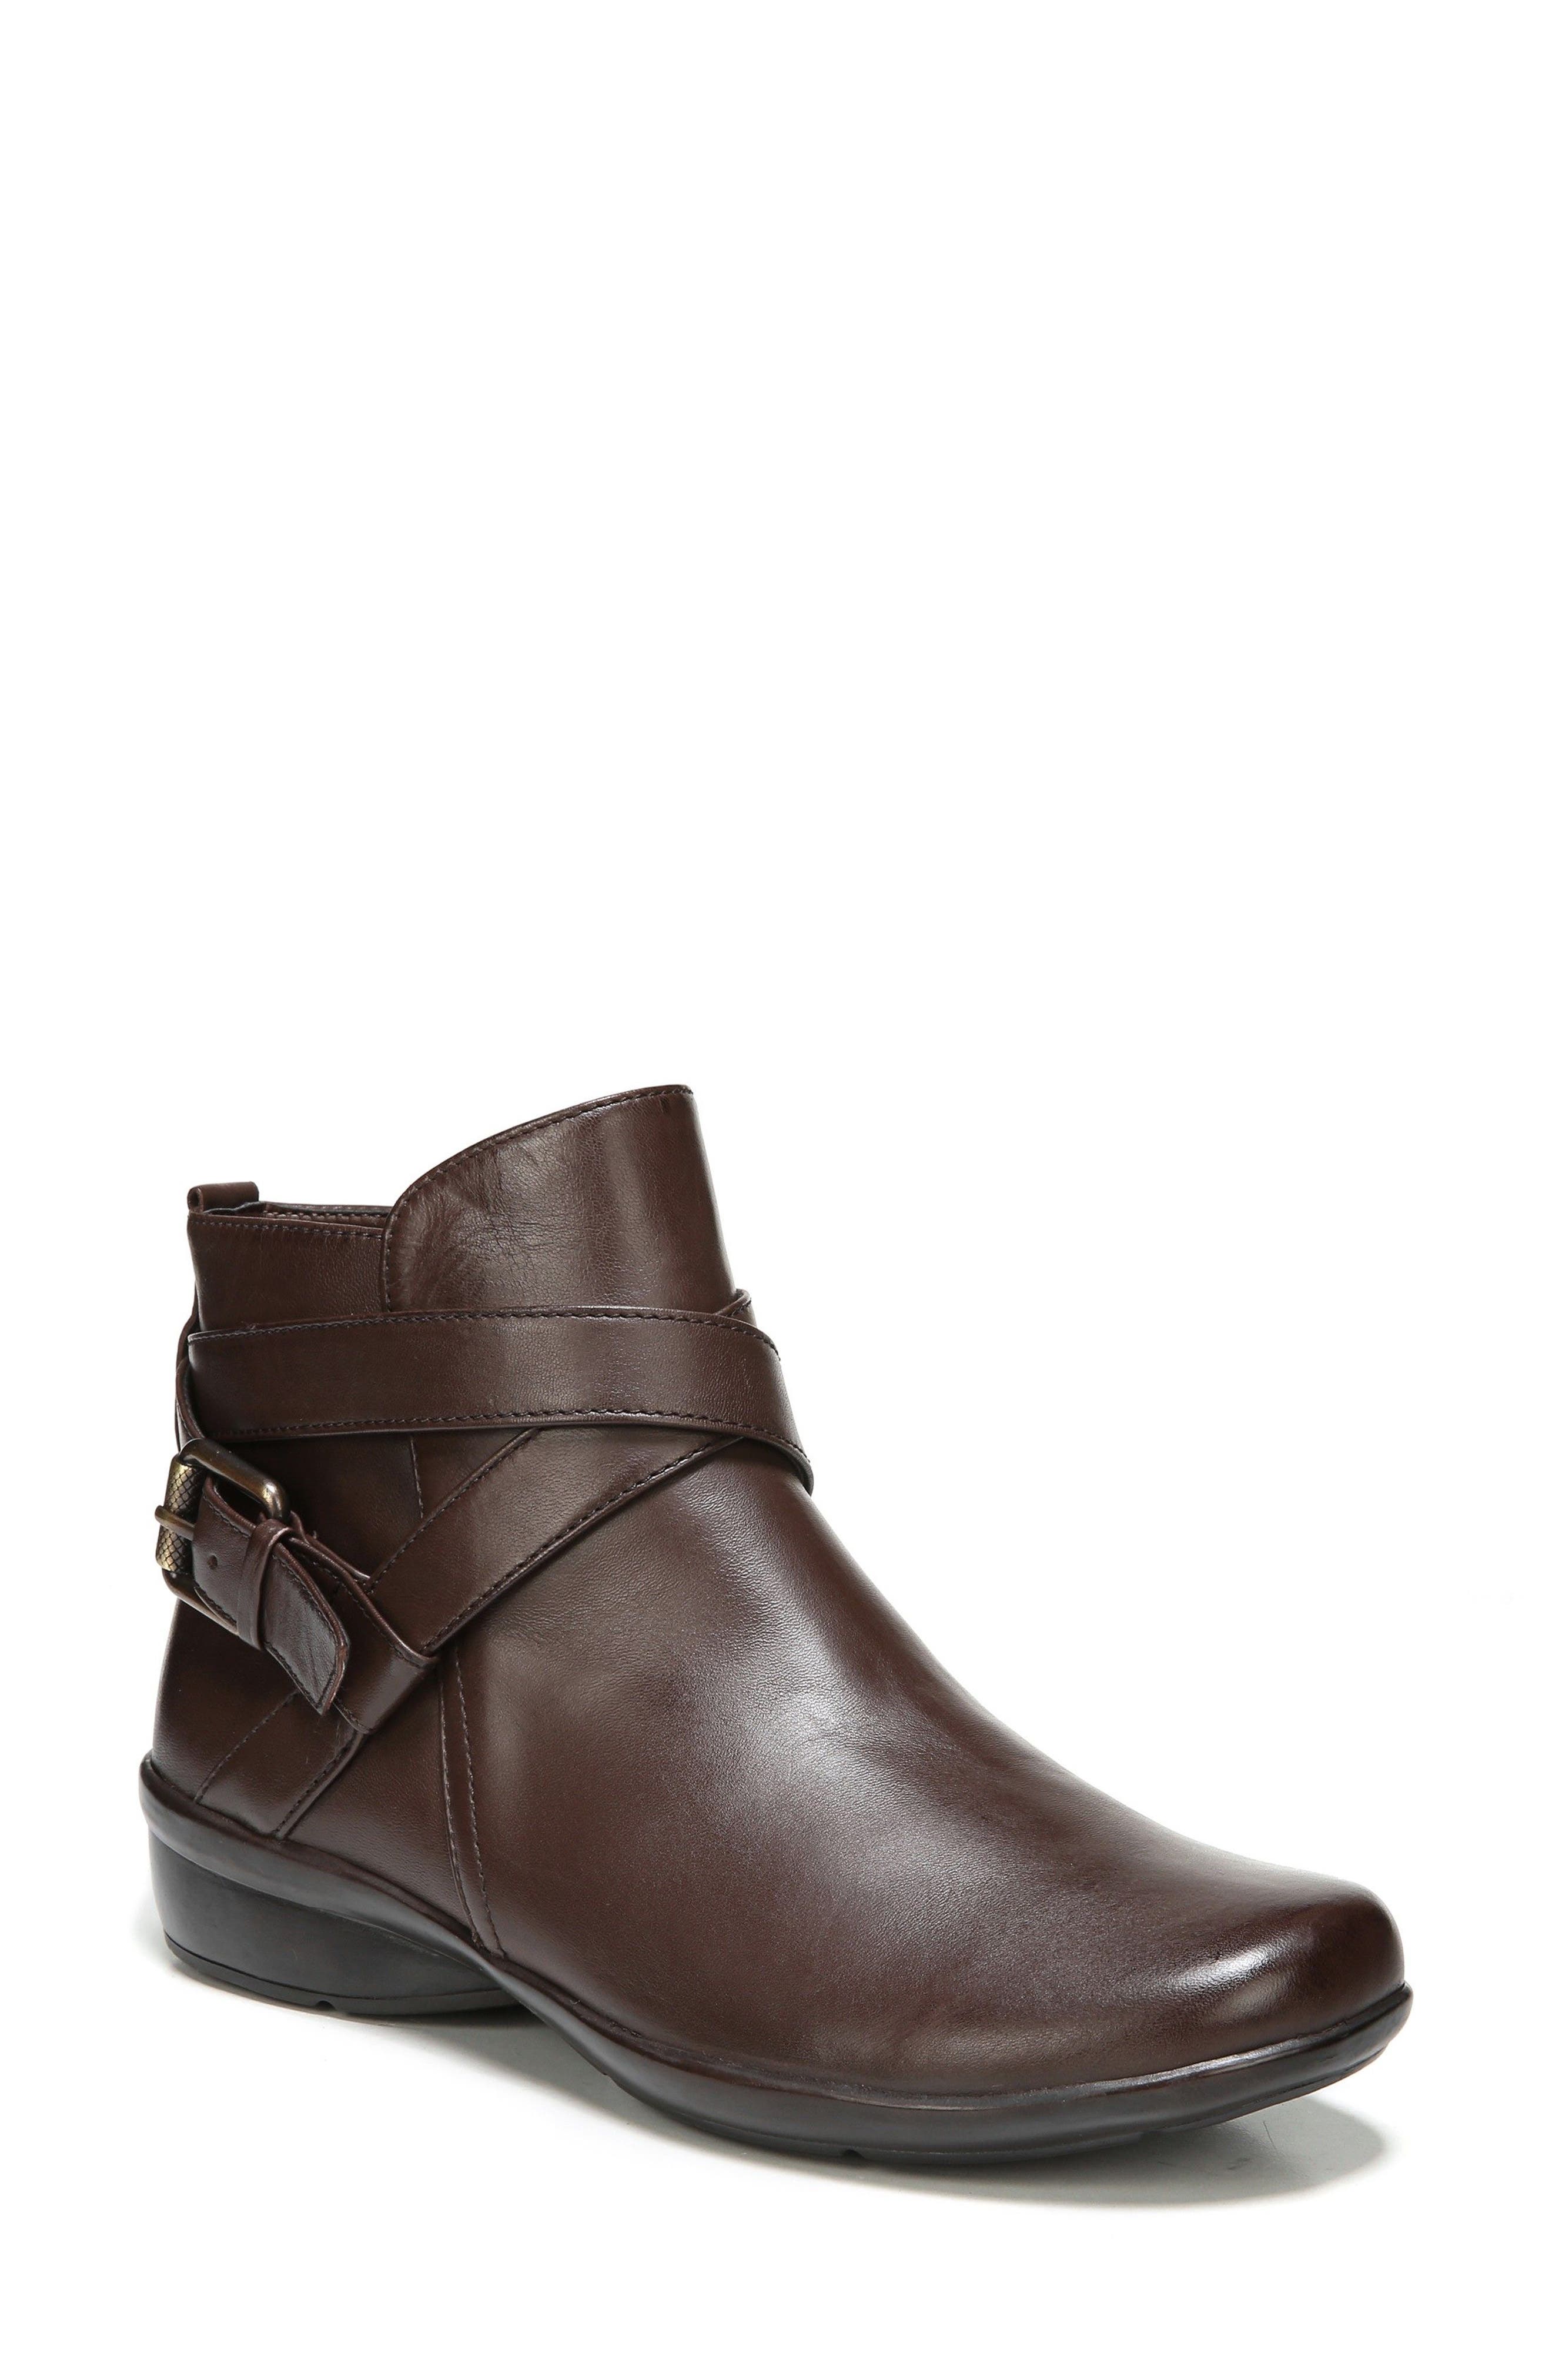 naturalizer cassandra ankle boots